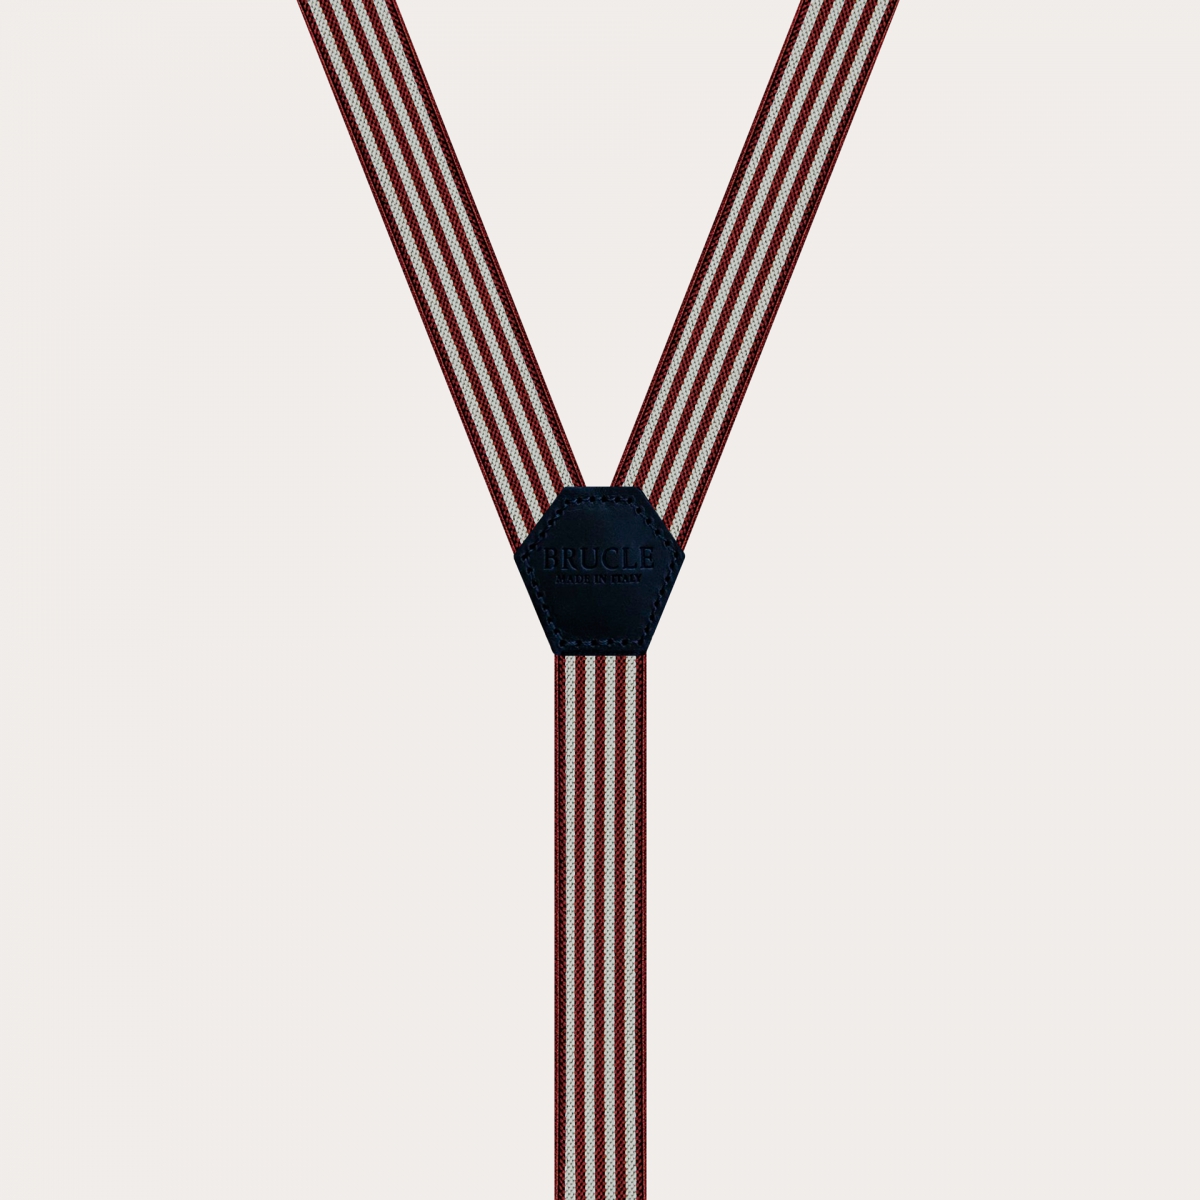 BRUCLE Unisex Y-shaped suspenders for kids and teens with stripes, burgundy and pearl